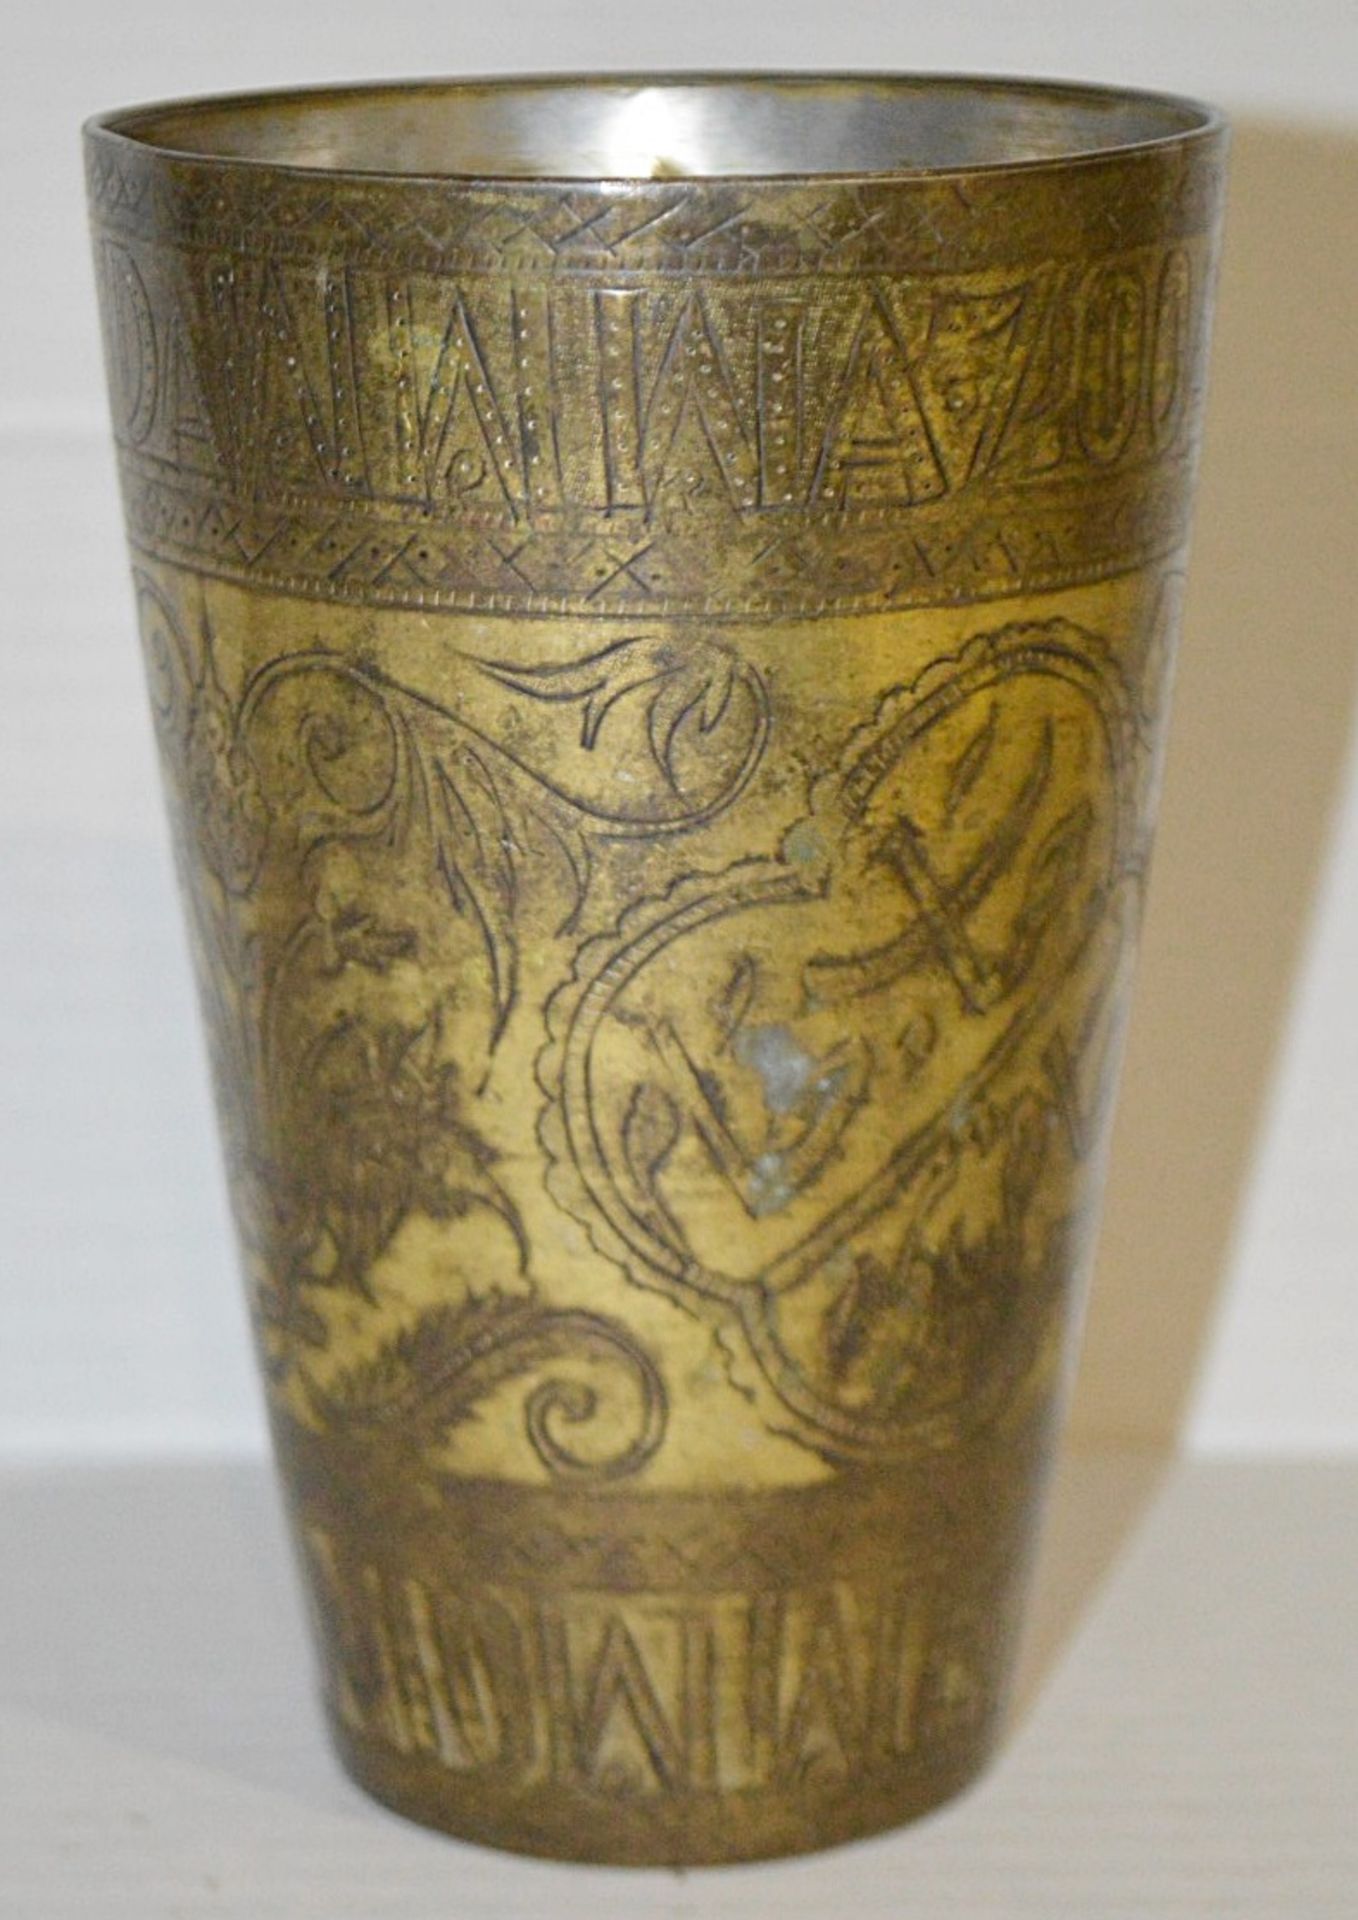 1 x Persian Gilded Tinner Beaker - Decorated With Floral Design And Scripture - Height: 14.5cm (5. - Image 6 of 6